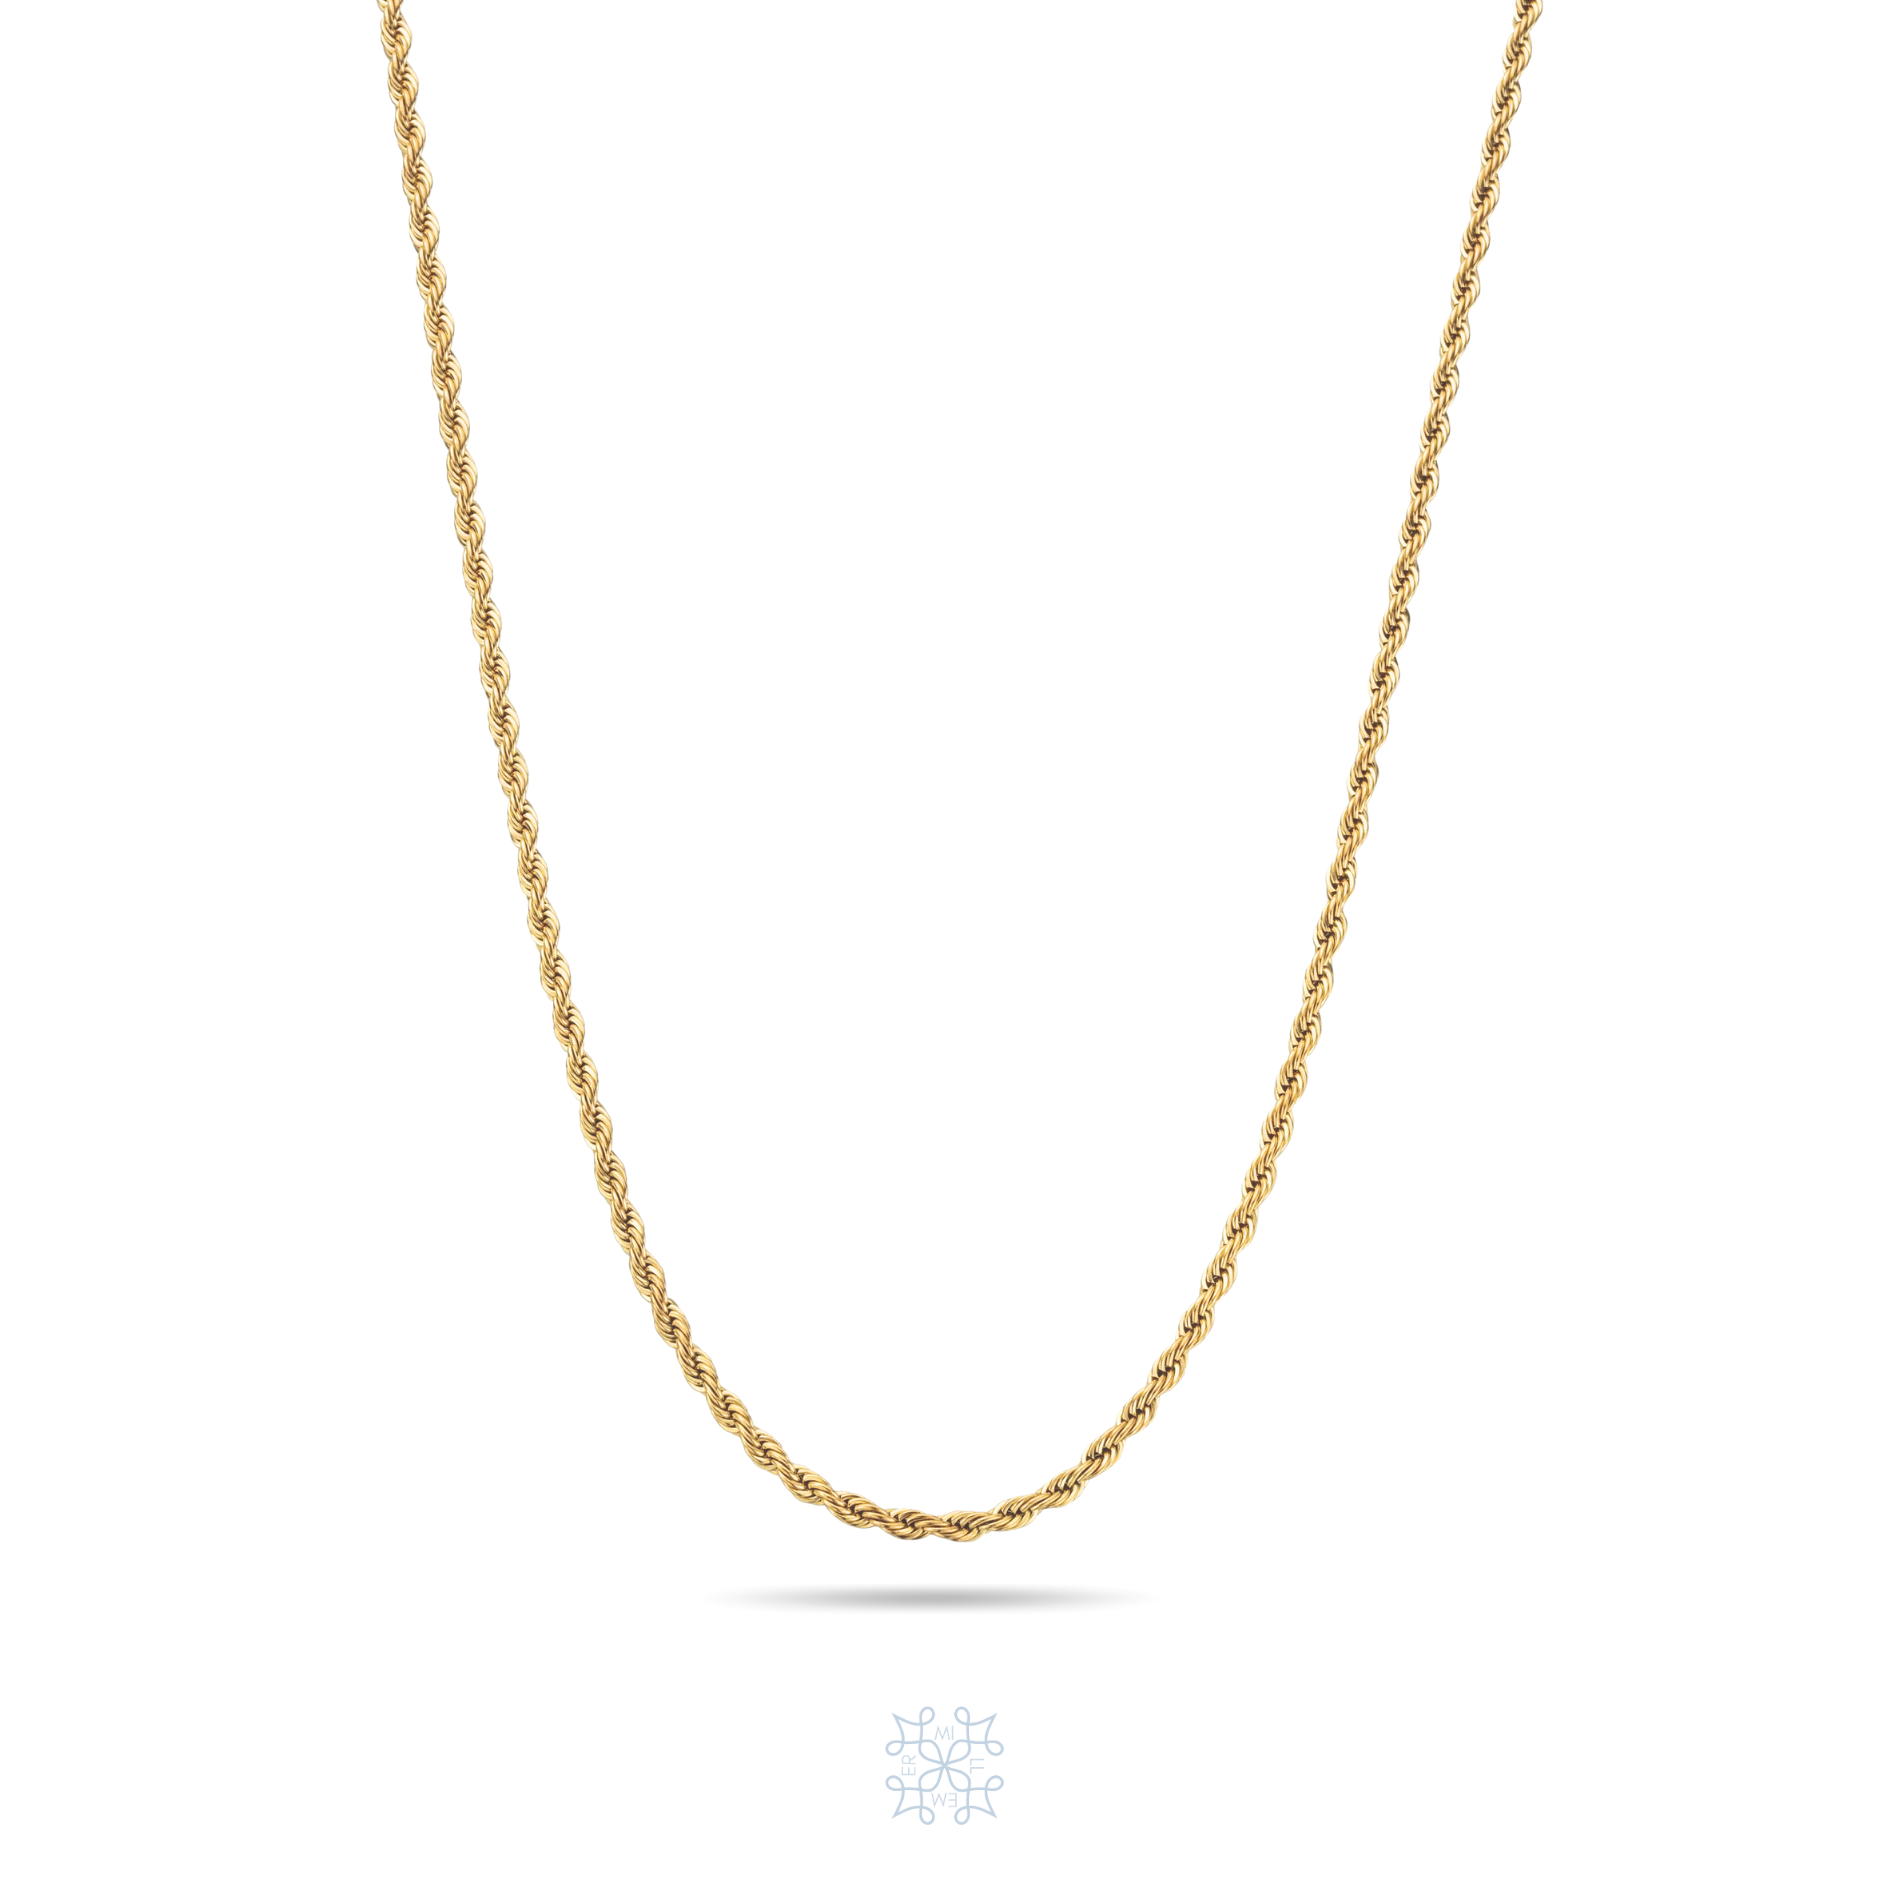 ROPE S Gold Chain Necklace - Rope texture elegant chain necklace. 